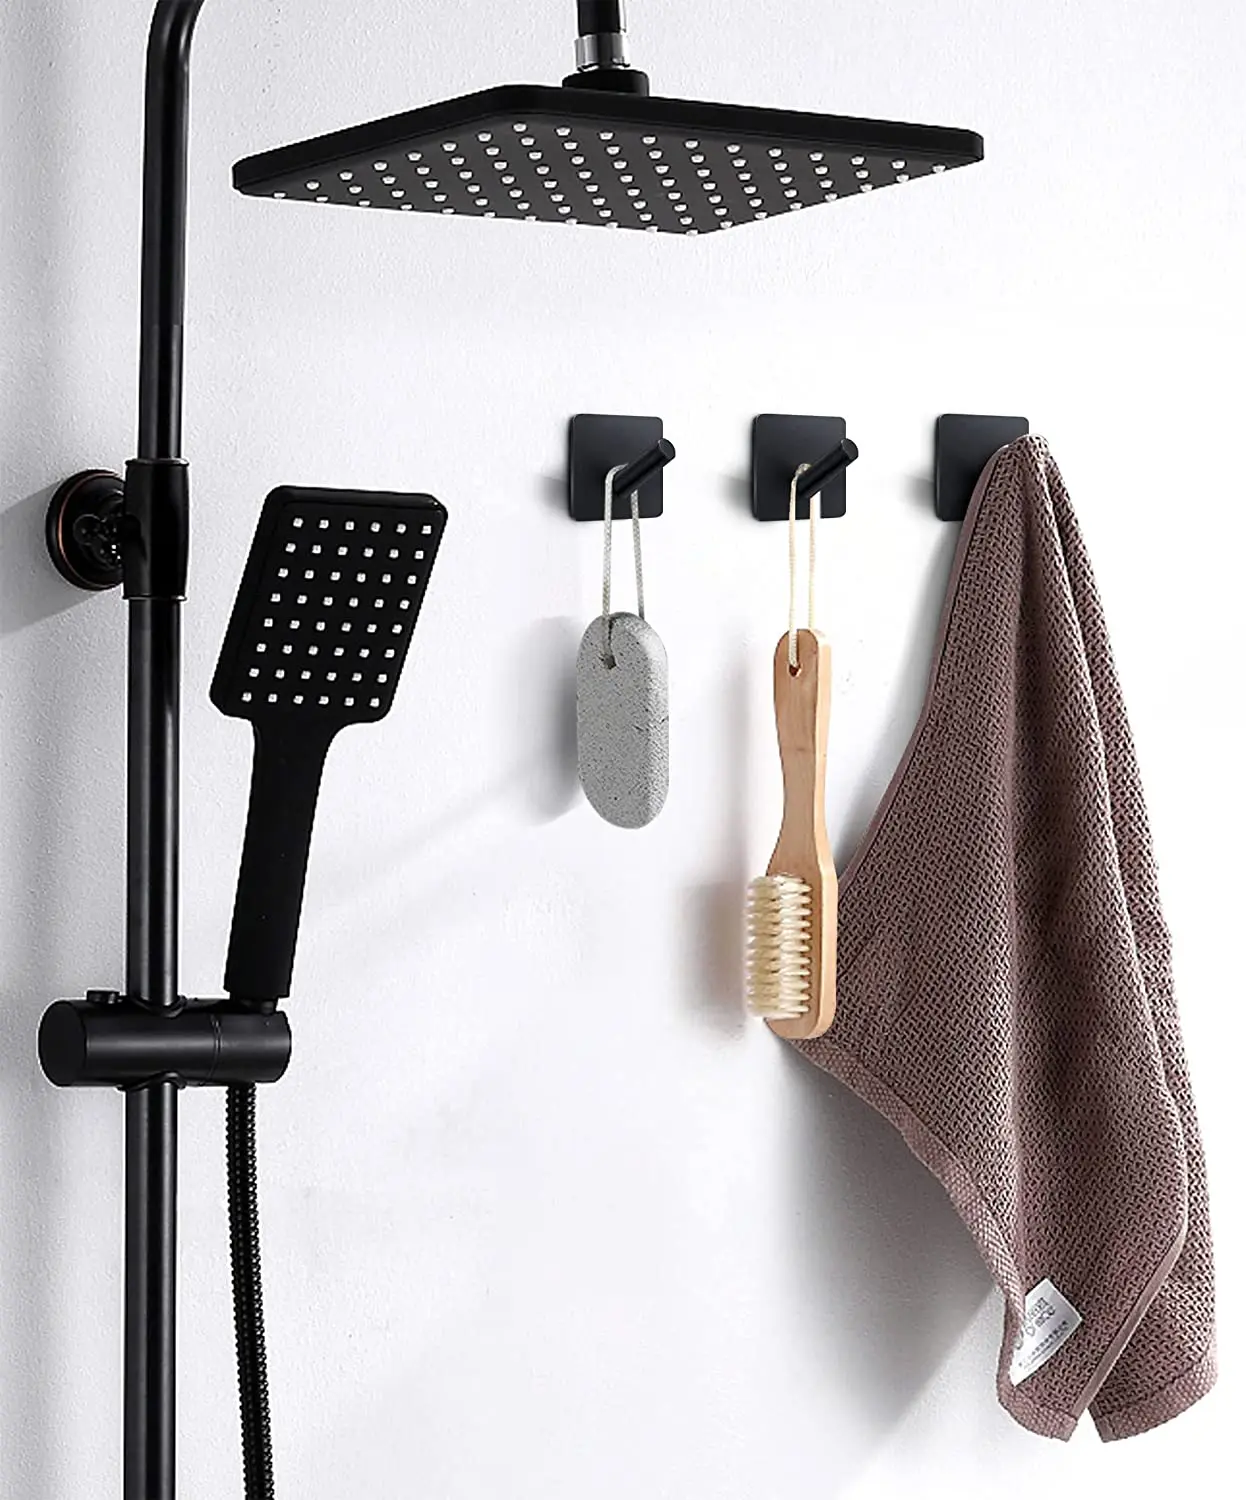 

4.5CM Square Bath Towel Non-Punching Adhesive Bathrooms Towel Holders Adhesive Wall Hooks for Bathrooms Stainless Steel Matte